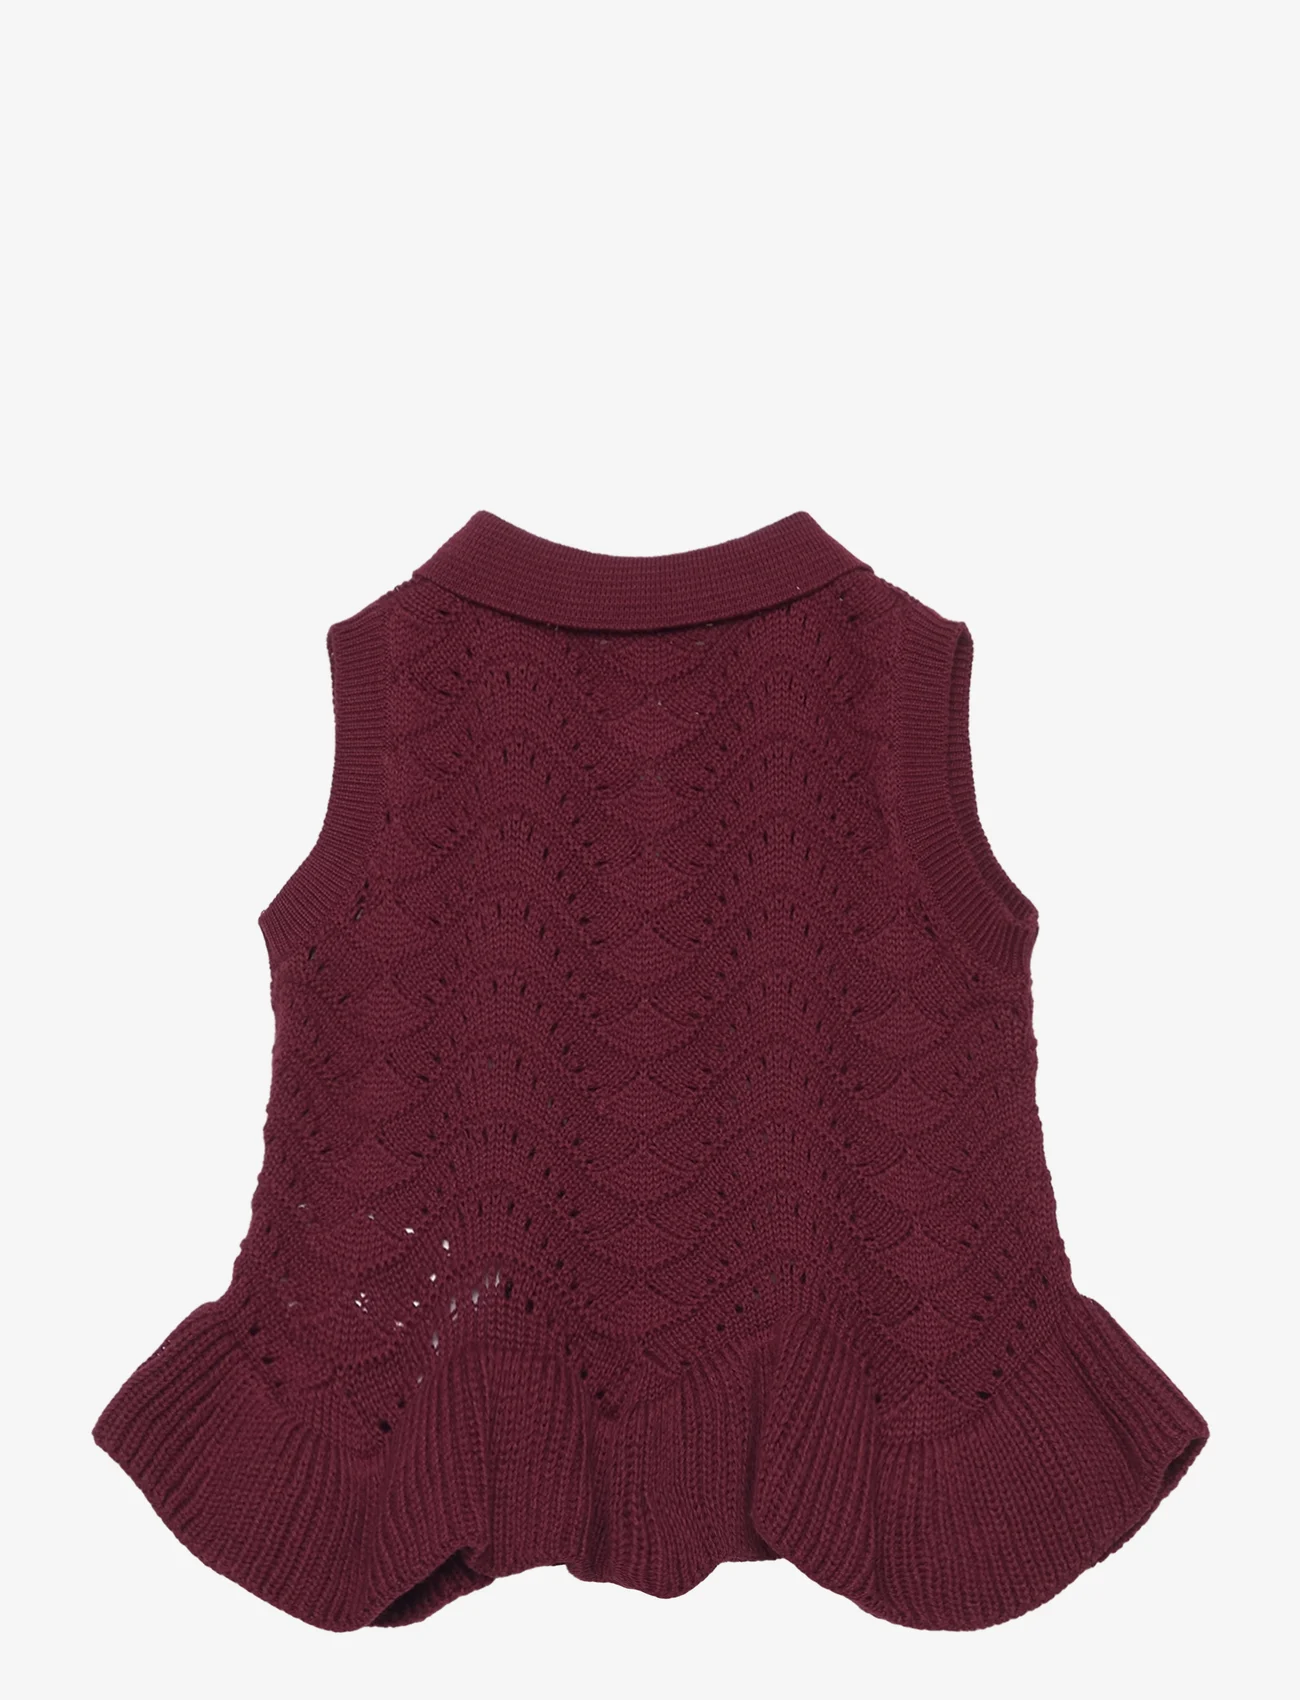 Müsli by Green Cotton - Knit needle out vest baby - laagste prijzen - fig - 1